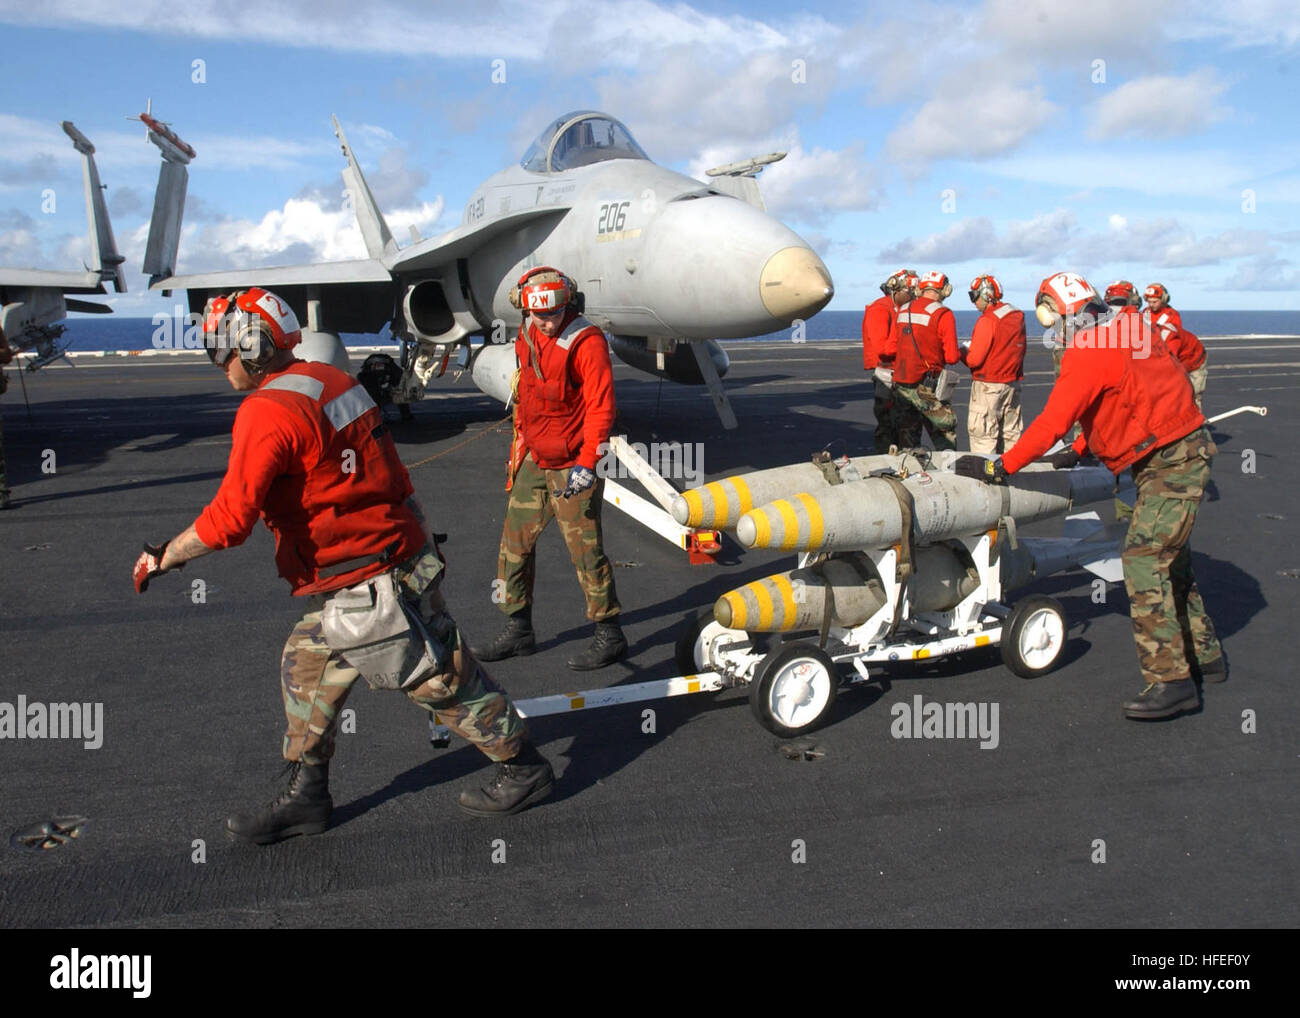 030116-N-6895M-509,510 At sea aboard USS Theodore Roosevelt (CVN-71) Jan. 16, 2003 -- Aviation Ordnancemen assigned to the ÒHuntersÓ of Strike Fighter Squadron Two Zero One (VFA-201) load  bombs under the wing of a F/A-18 ÒHornetÓ on the shipÕs flight deck.  Roosevelt and her embarked Carrier Air Wing Eight (CVW-8) are currently underway conducting training missions in the Atlantic Ocean. U.S. Navy photo by PhotographerÕs Mate 2nd Class James K. McNeil.  (RELEASED) US Navy 030116-N-6895M-509 Aviation Ordnancemen assigned to the Hunters load bombs under the wing of a F-A-18 Stock Photo